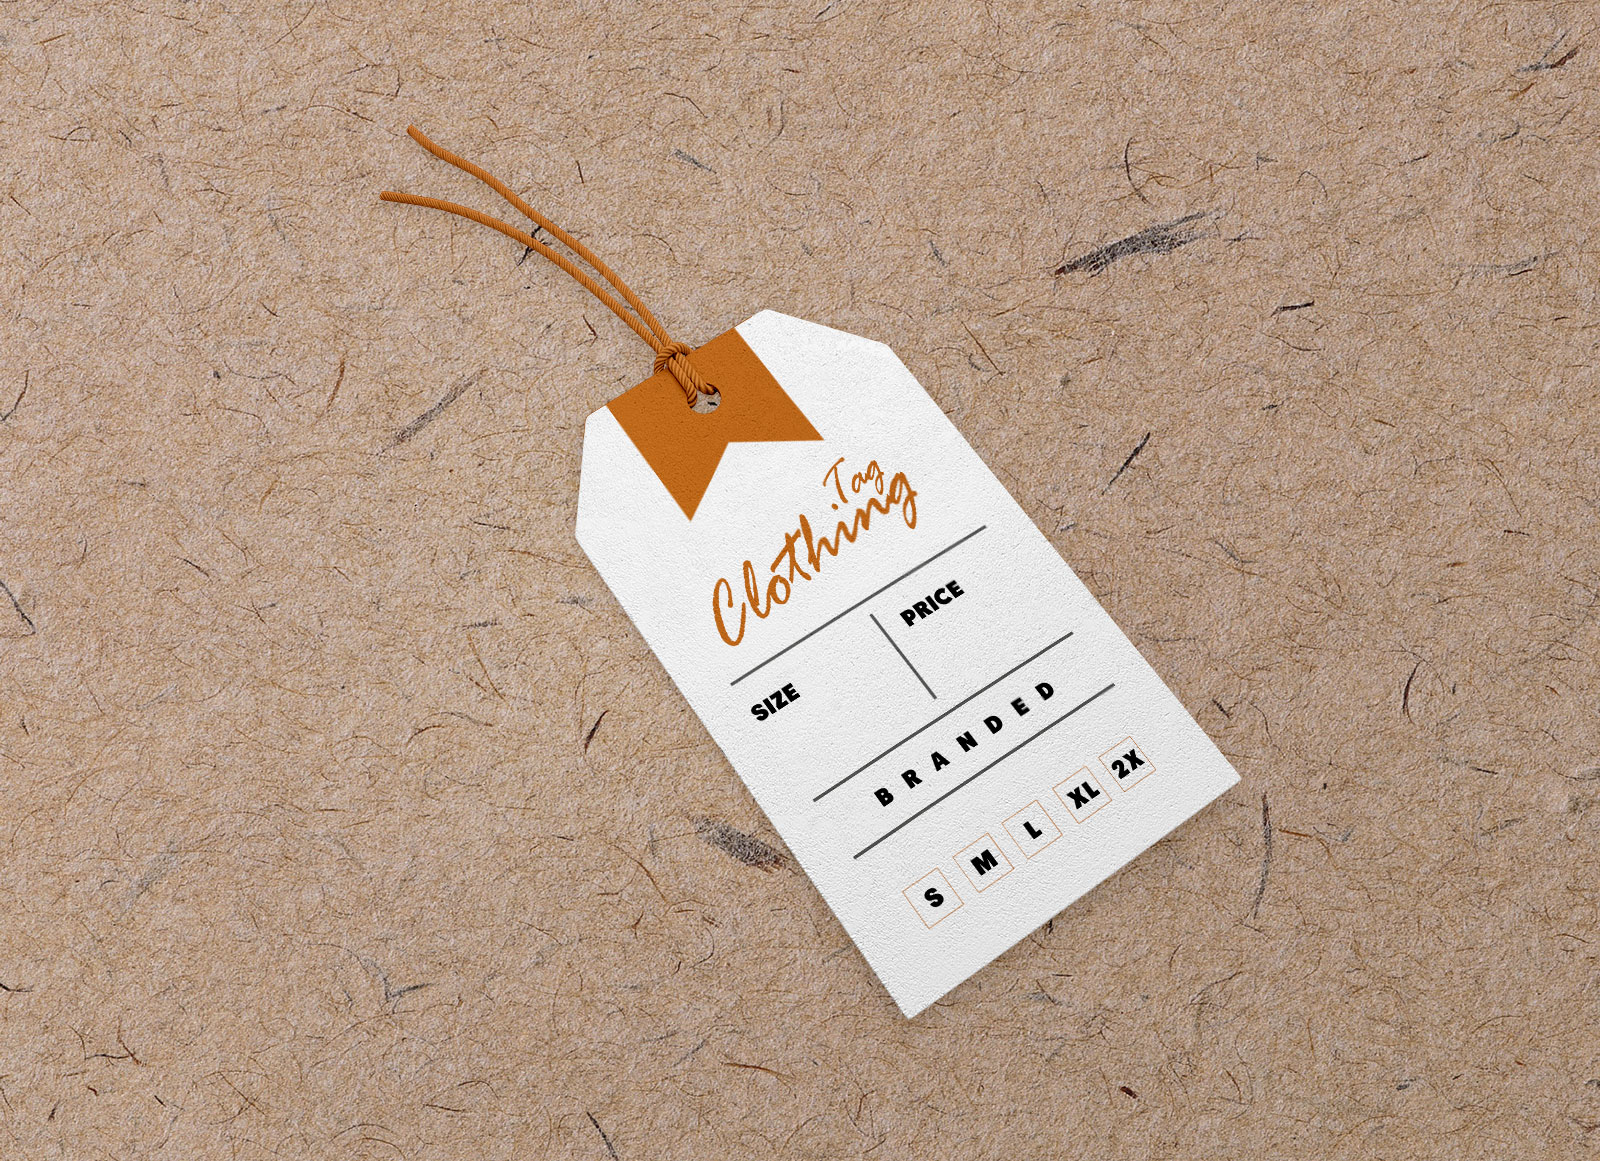 Download Free Clothing Tag Mockup PSD | Free Mockups, Best Free PSD ...